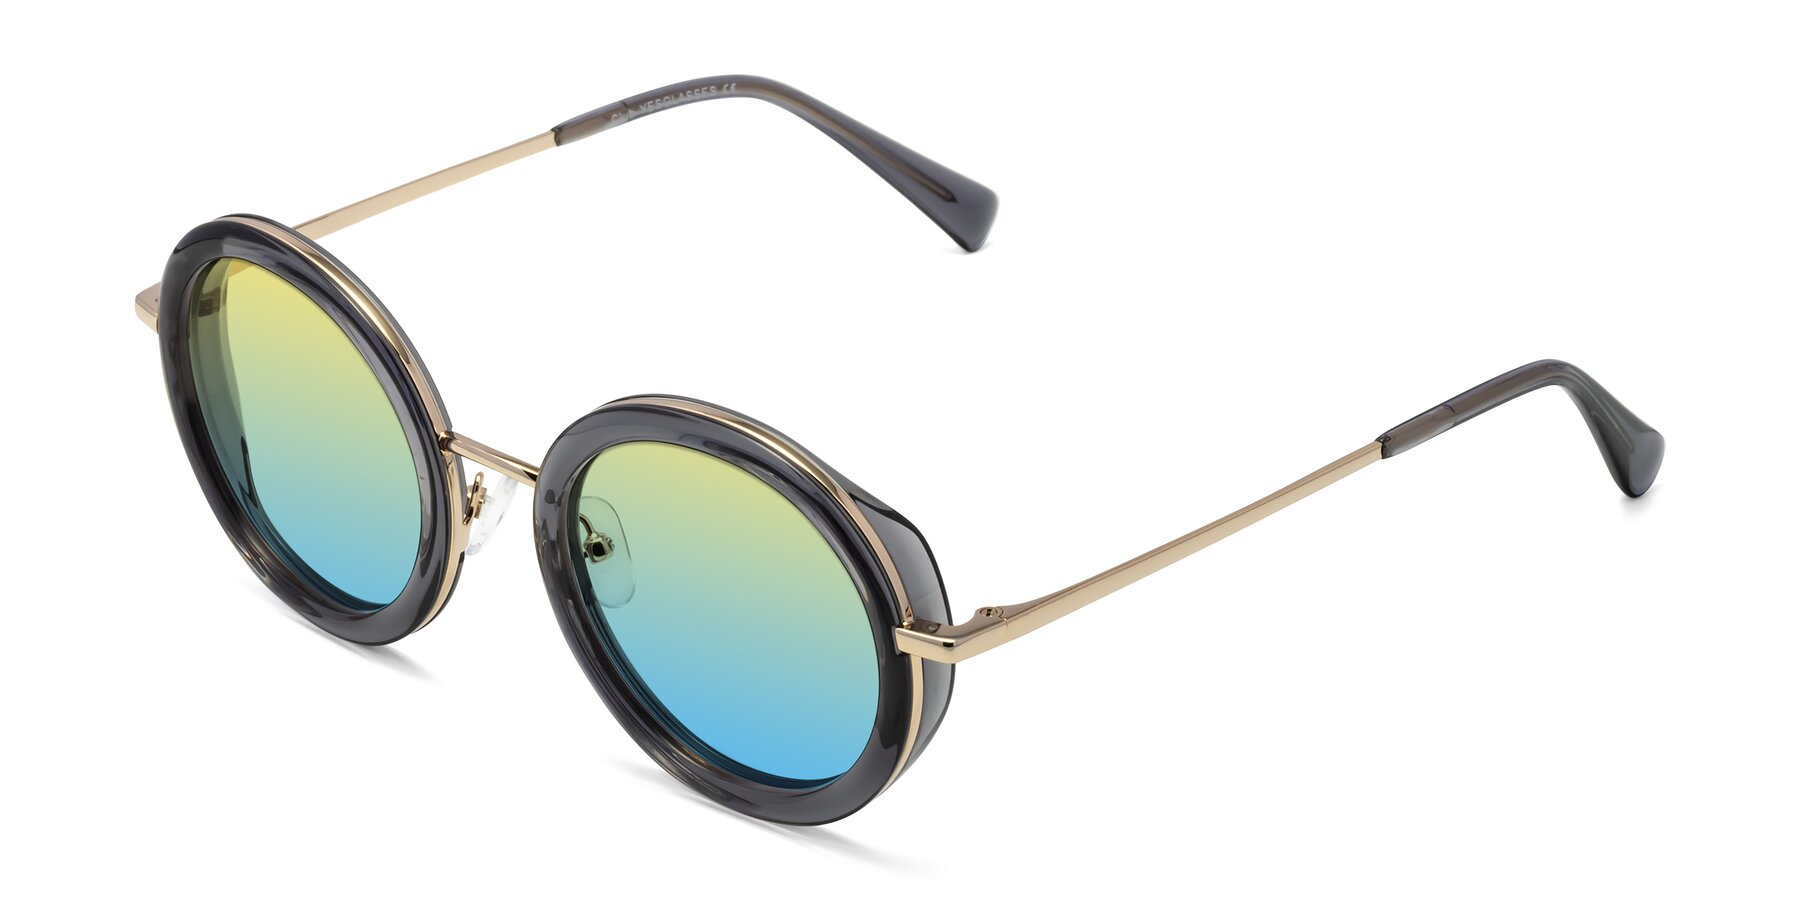 Angle of Club in Gray-Gold with Yellow / Blue Gradient Lenses